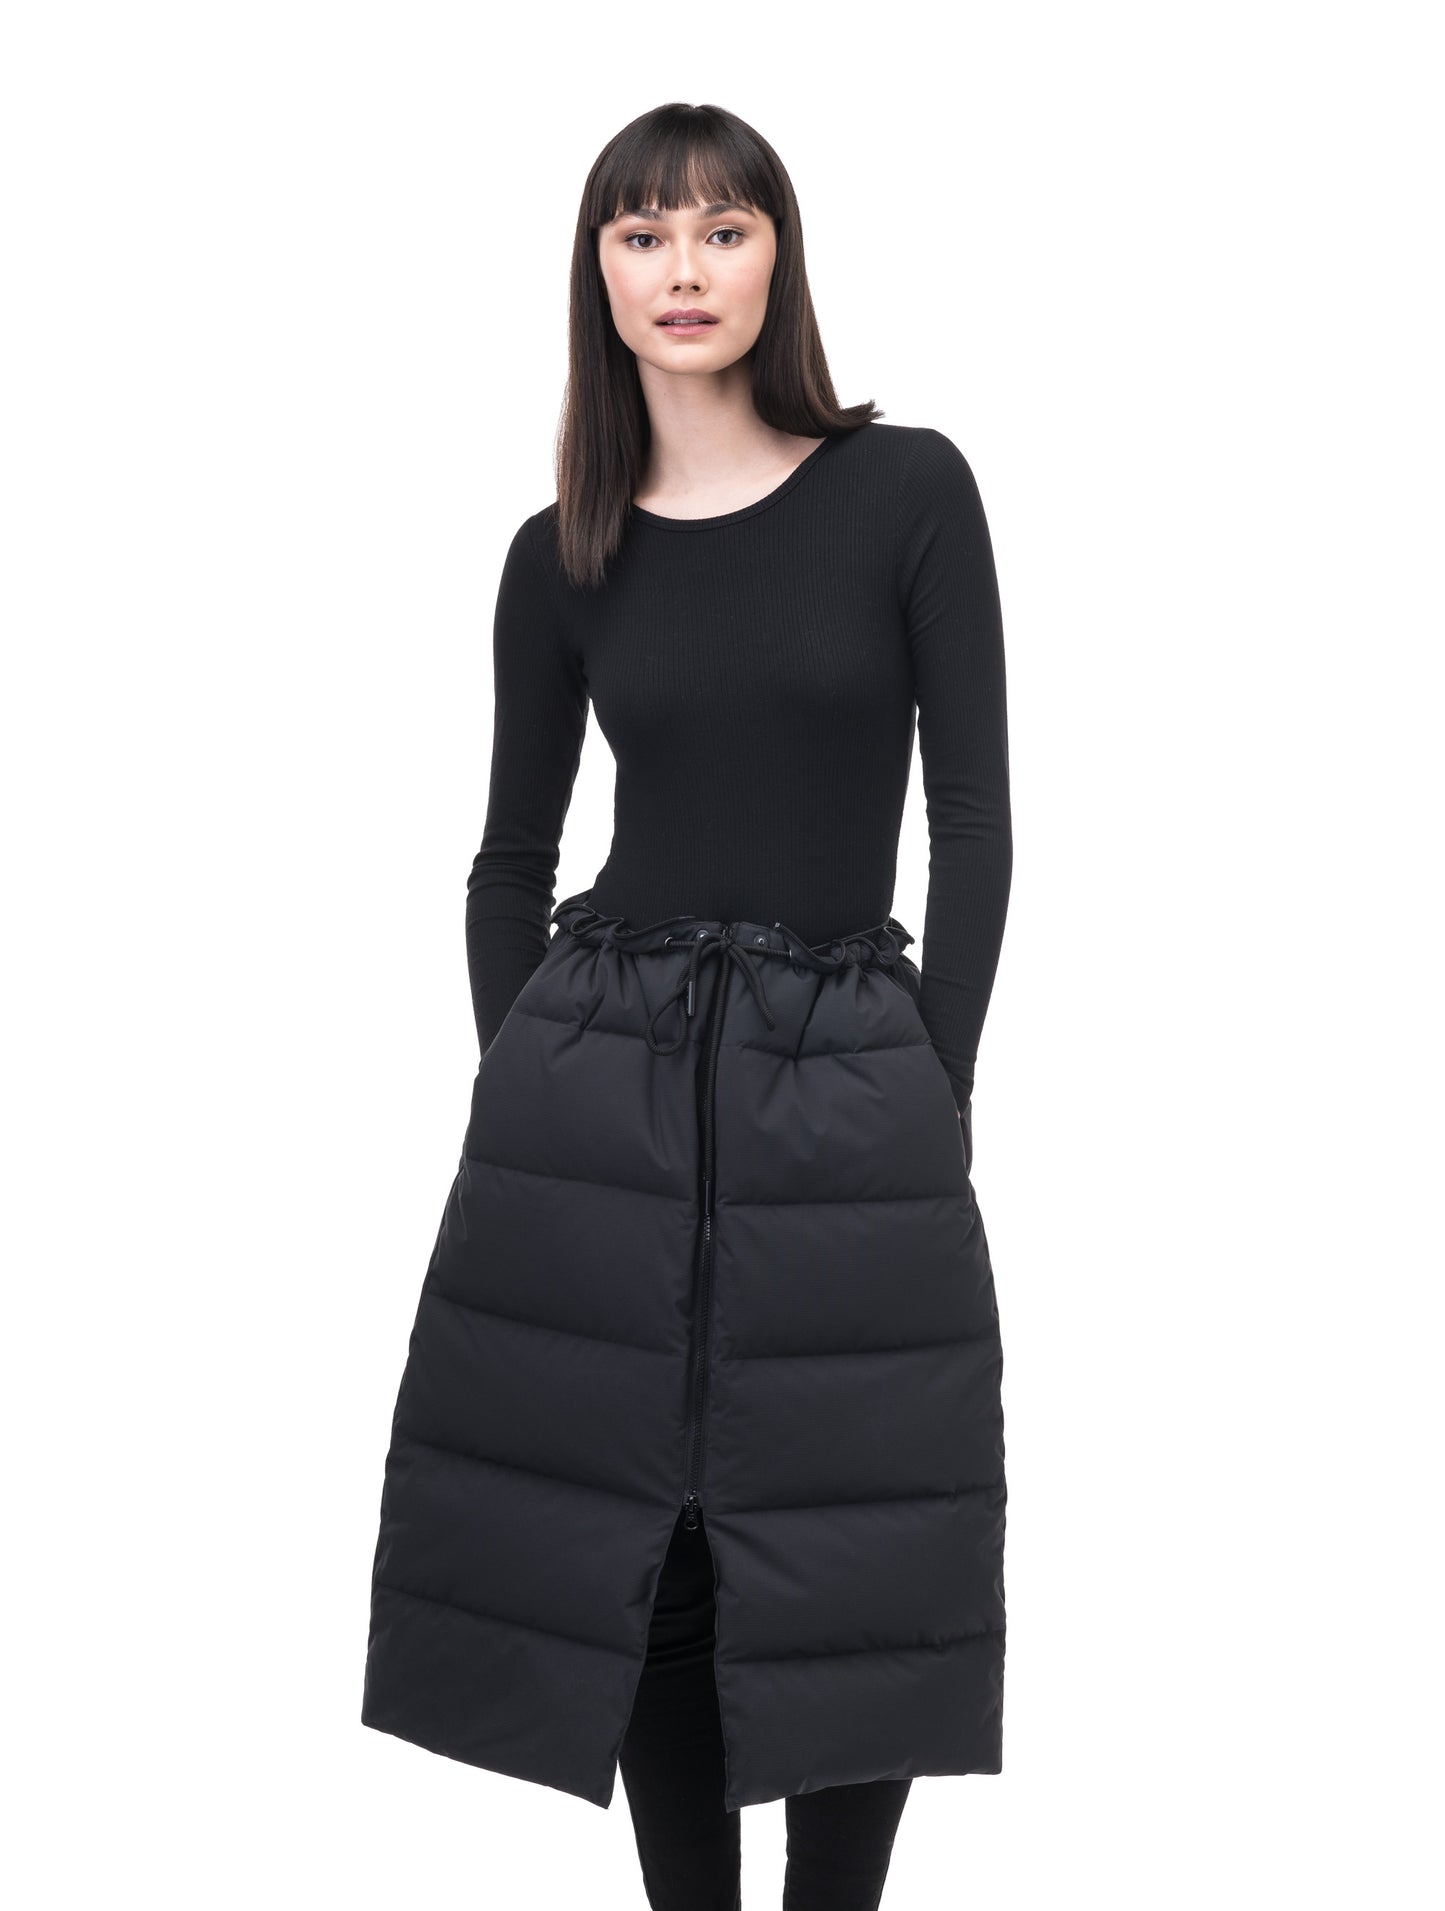 Forma Ladies 2-in-1 Long Quilted Jacket in below the knee length, quilted body, soft ribbed cuffs, removable shearling collar and pockets, and removable cinchable skirt, in Black